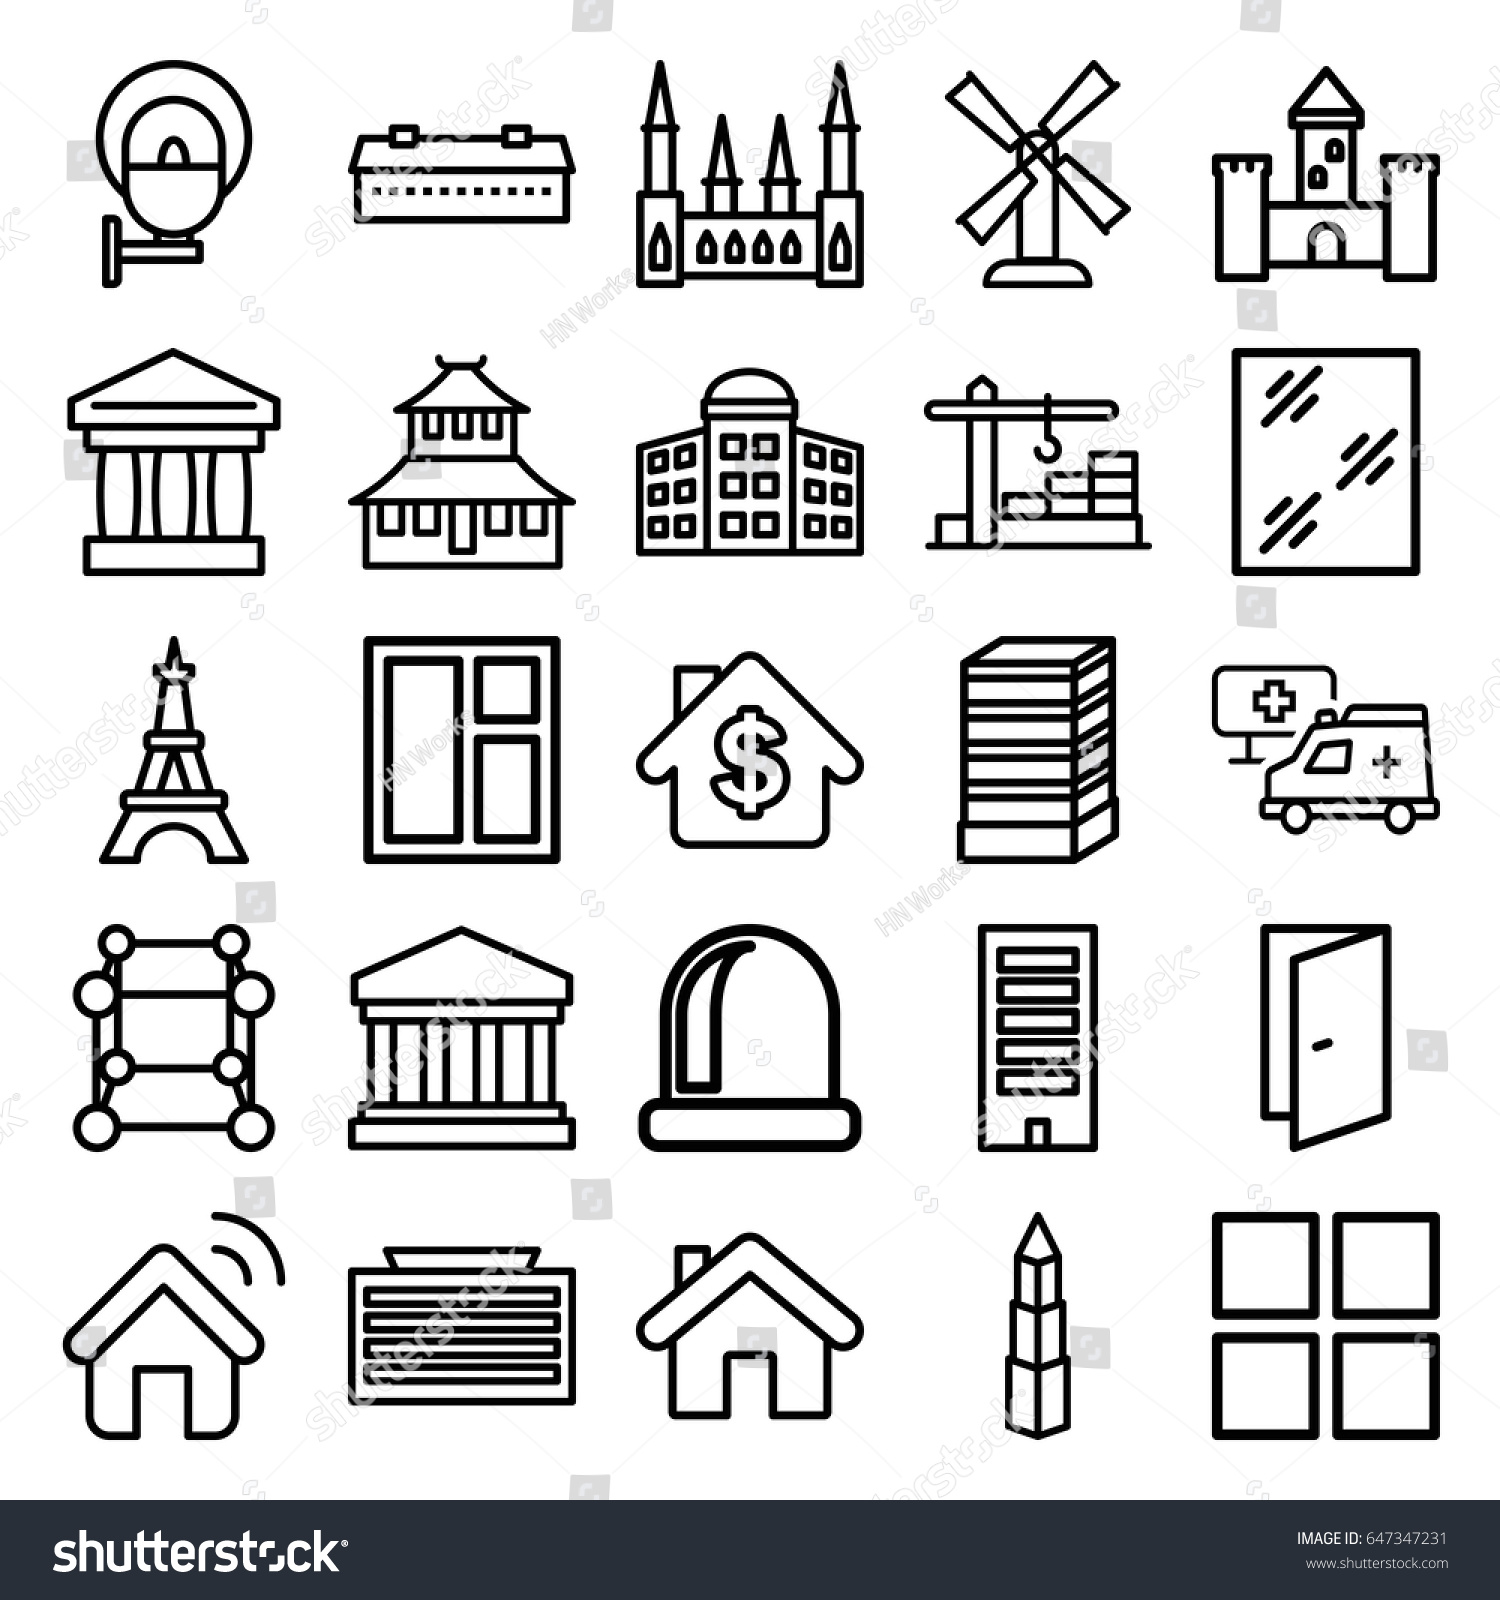 Architecture Icons Set Set 25 Architecture Stock Vector (Royalty Free ...